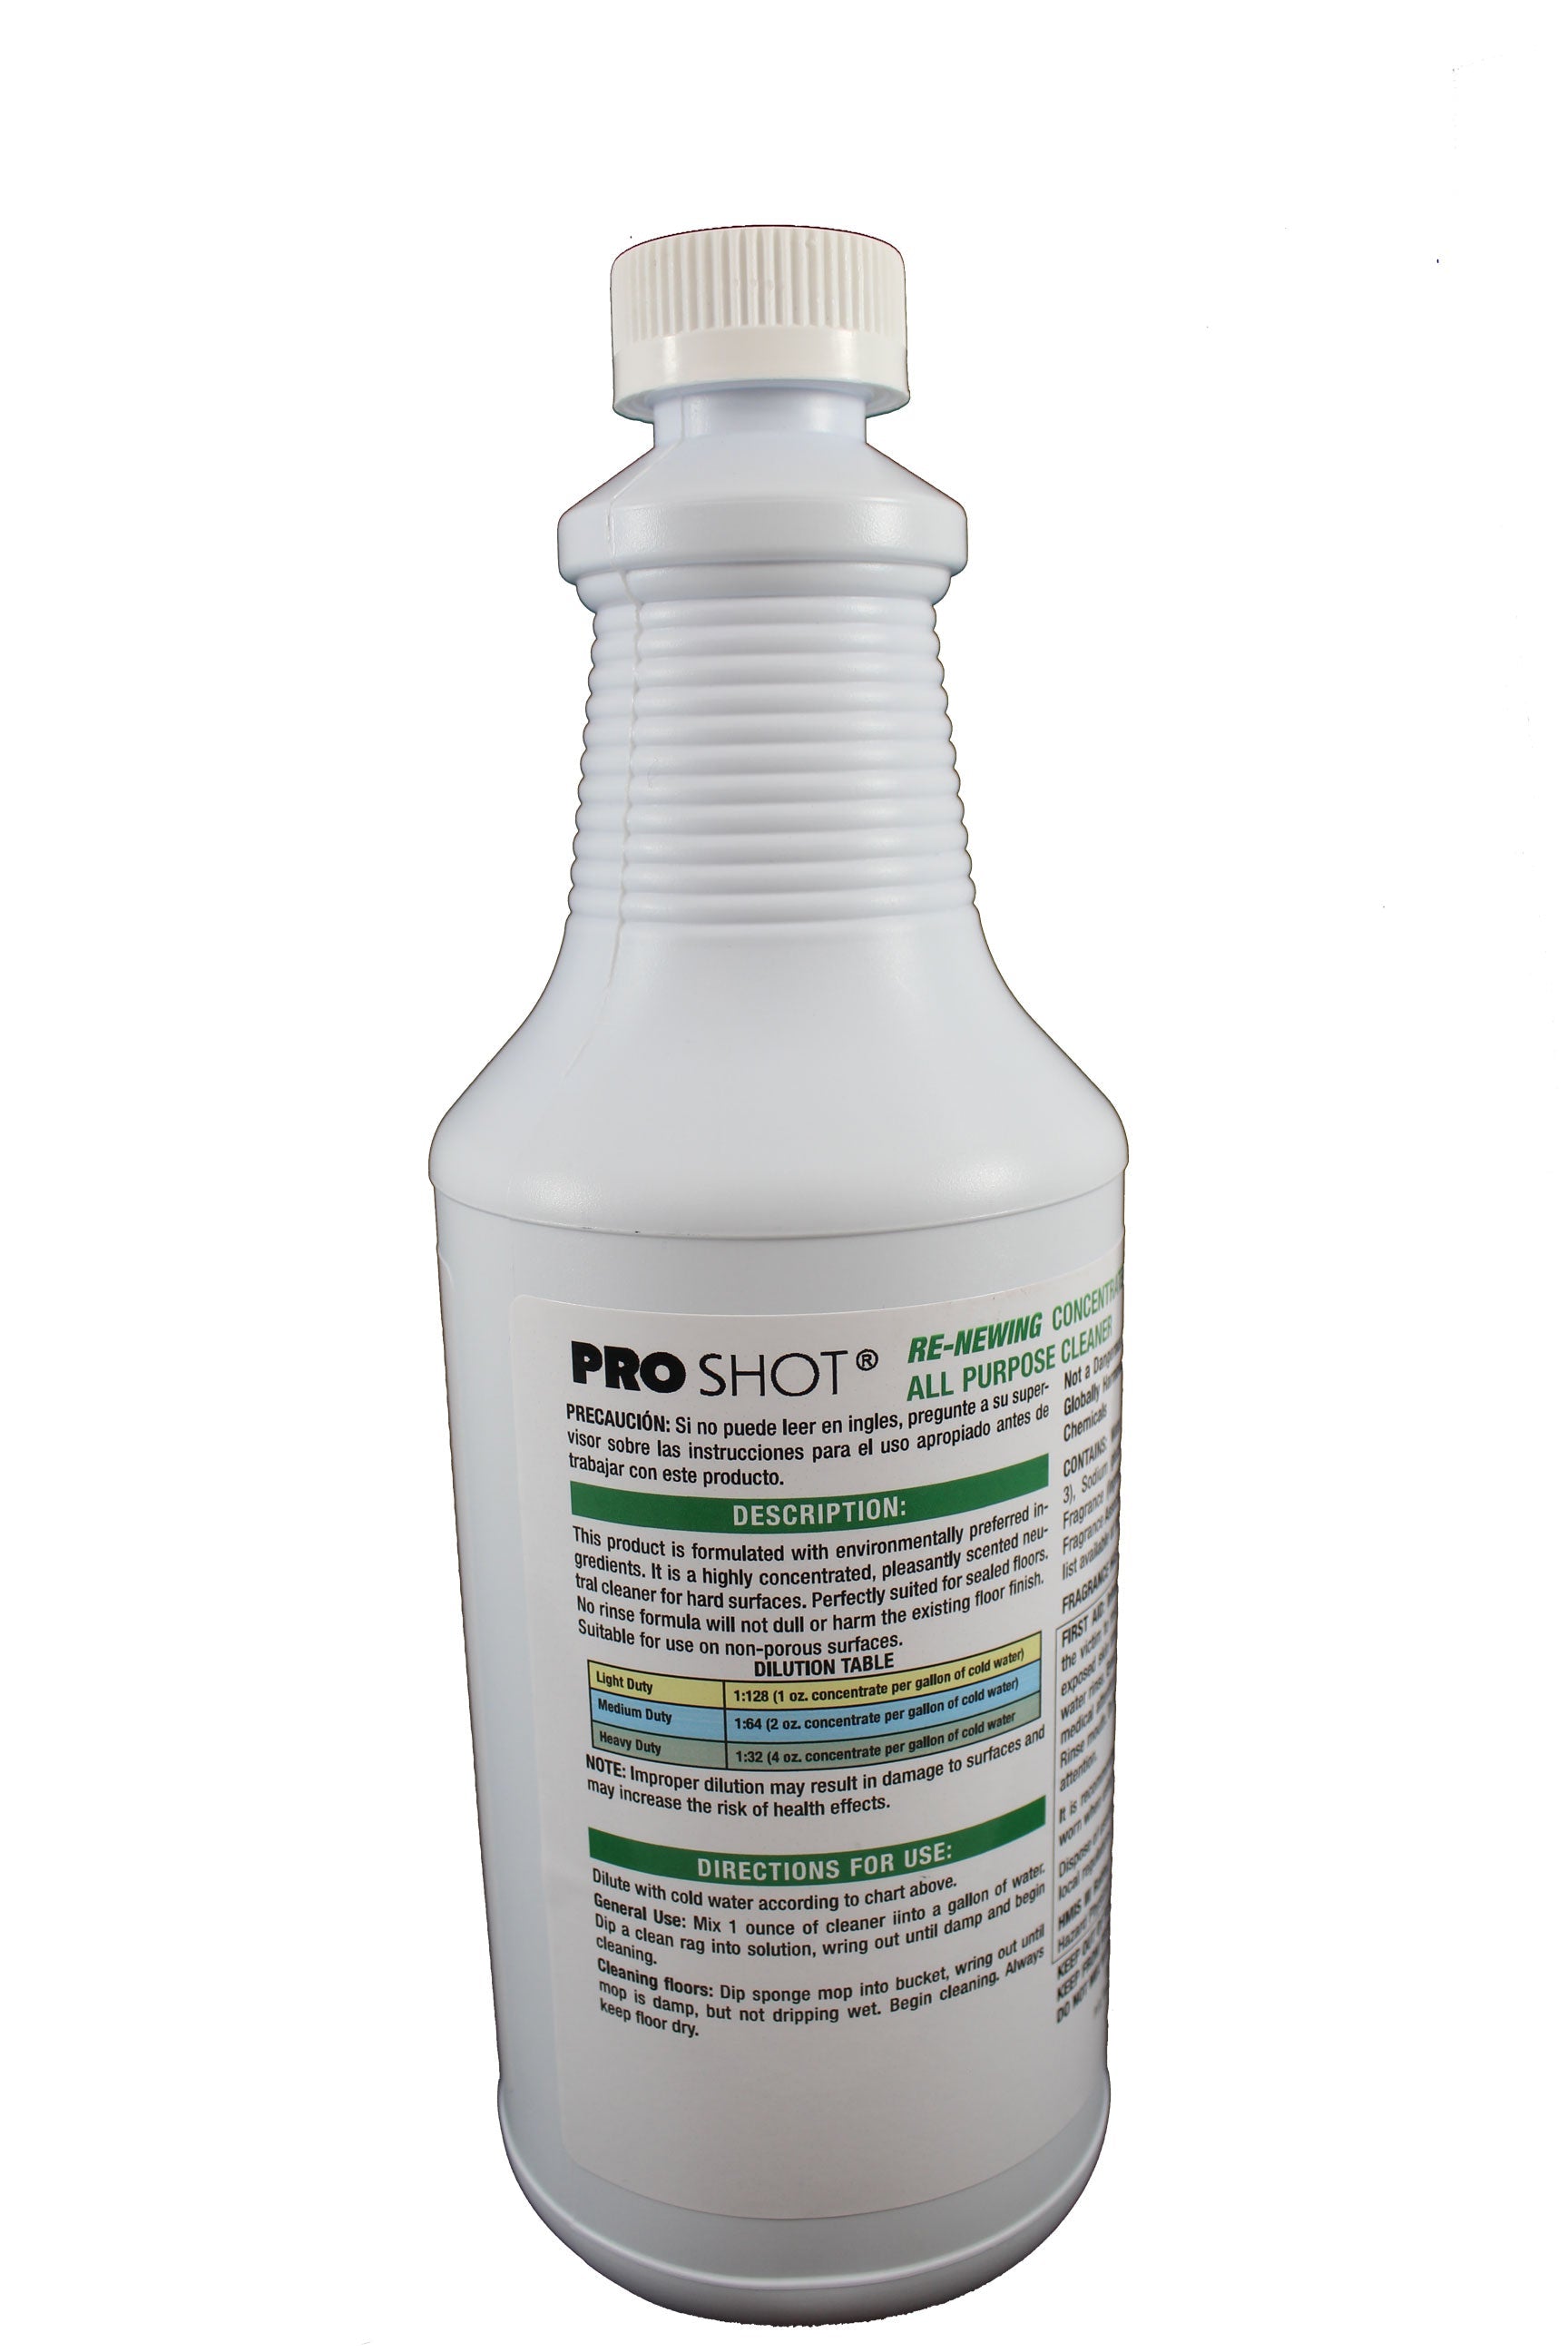 PRO SHOT® Re-Newing Concentrated All Purpose Cleaner 32 oz directions image